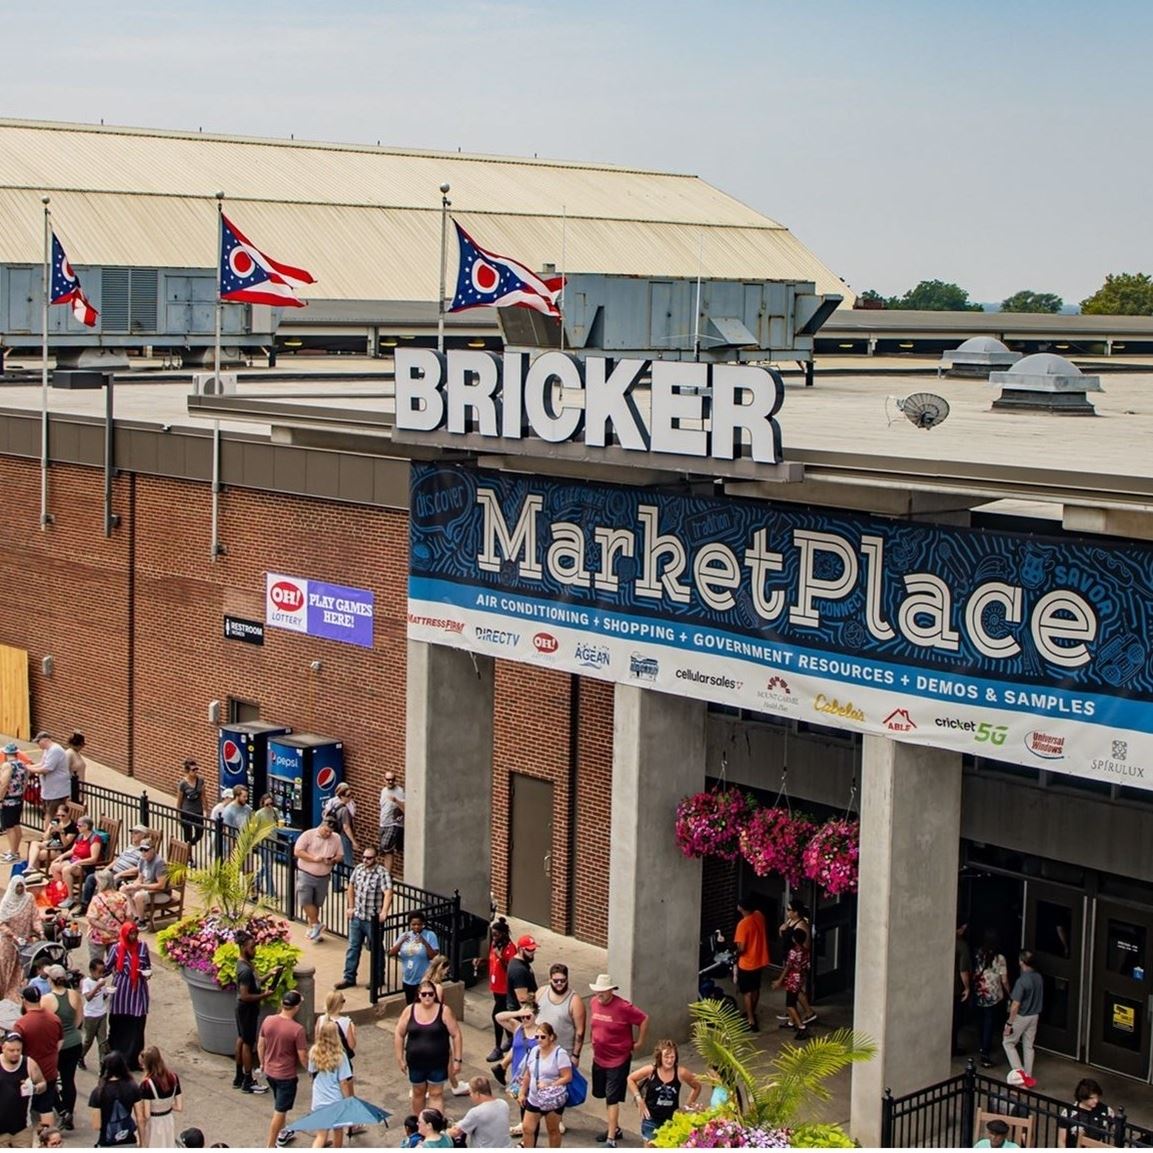 Building with sign that reads Bricker MarketPlace with flags on the top of the building and people waking in front of building.